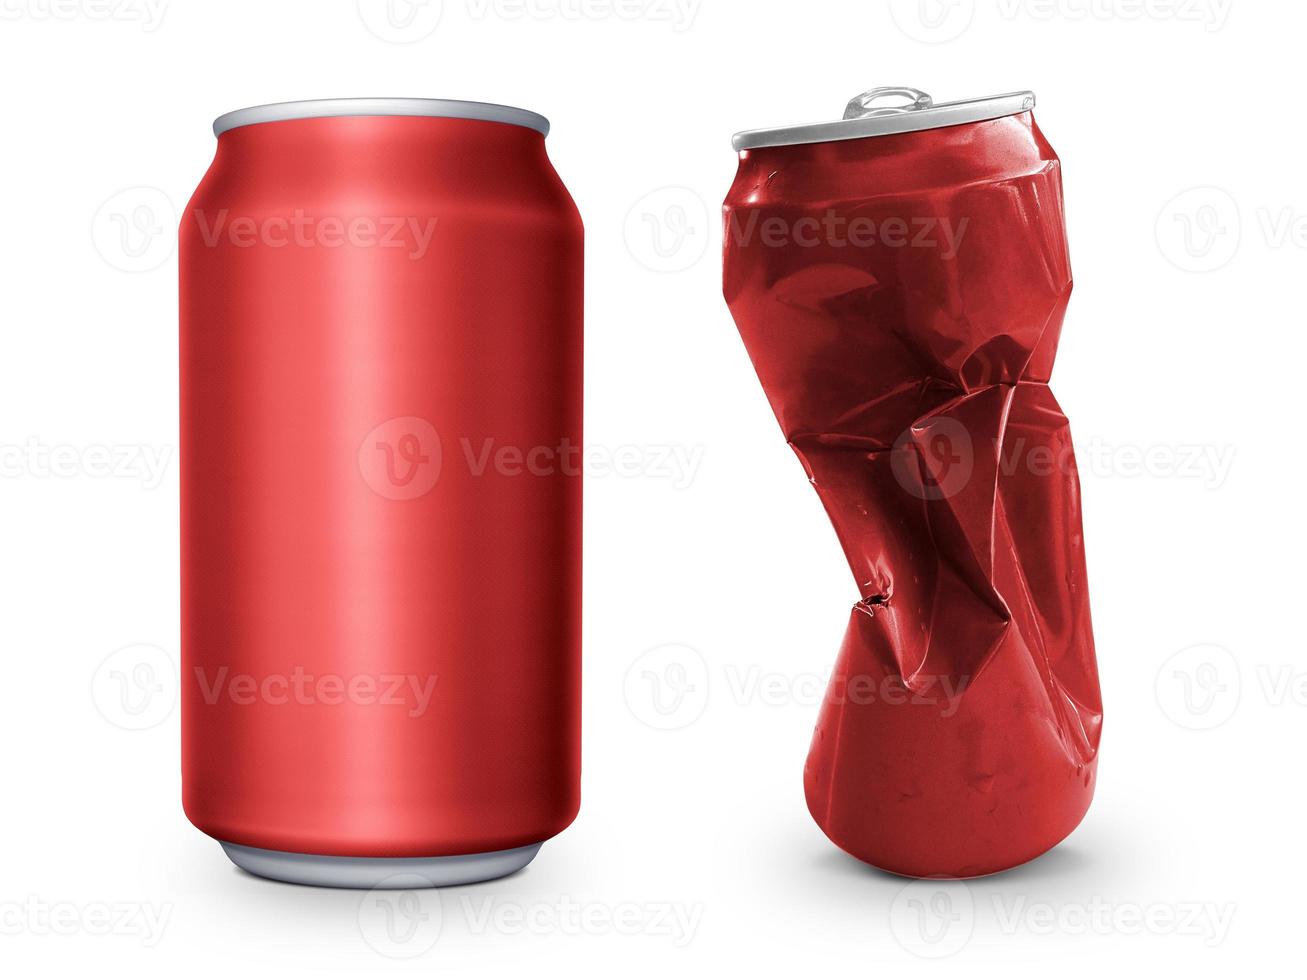 Crumpled empty blank soda and beer can garbage, Crushed junk can can recycle isolated on white background photo